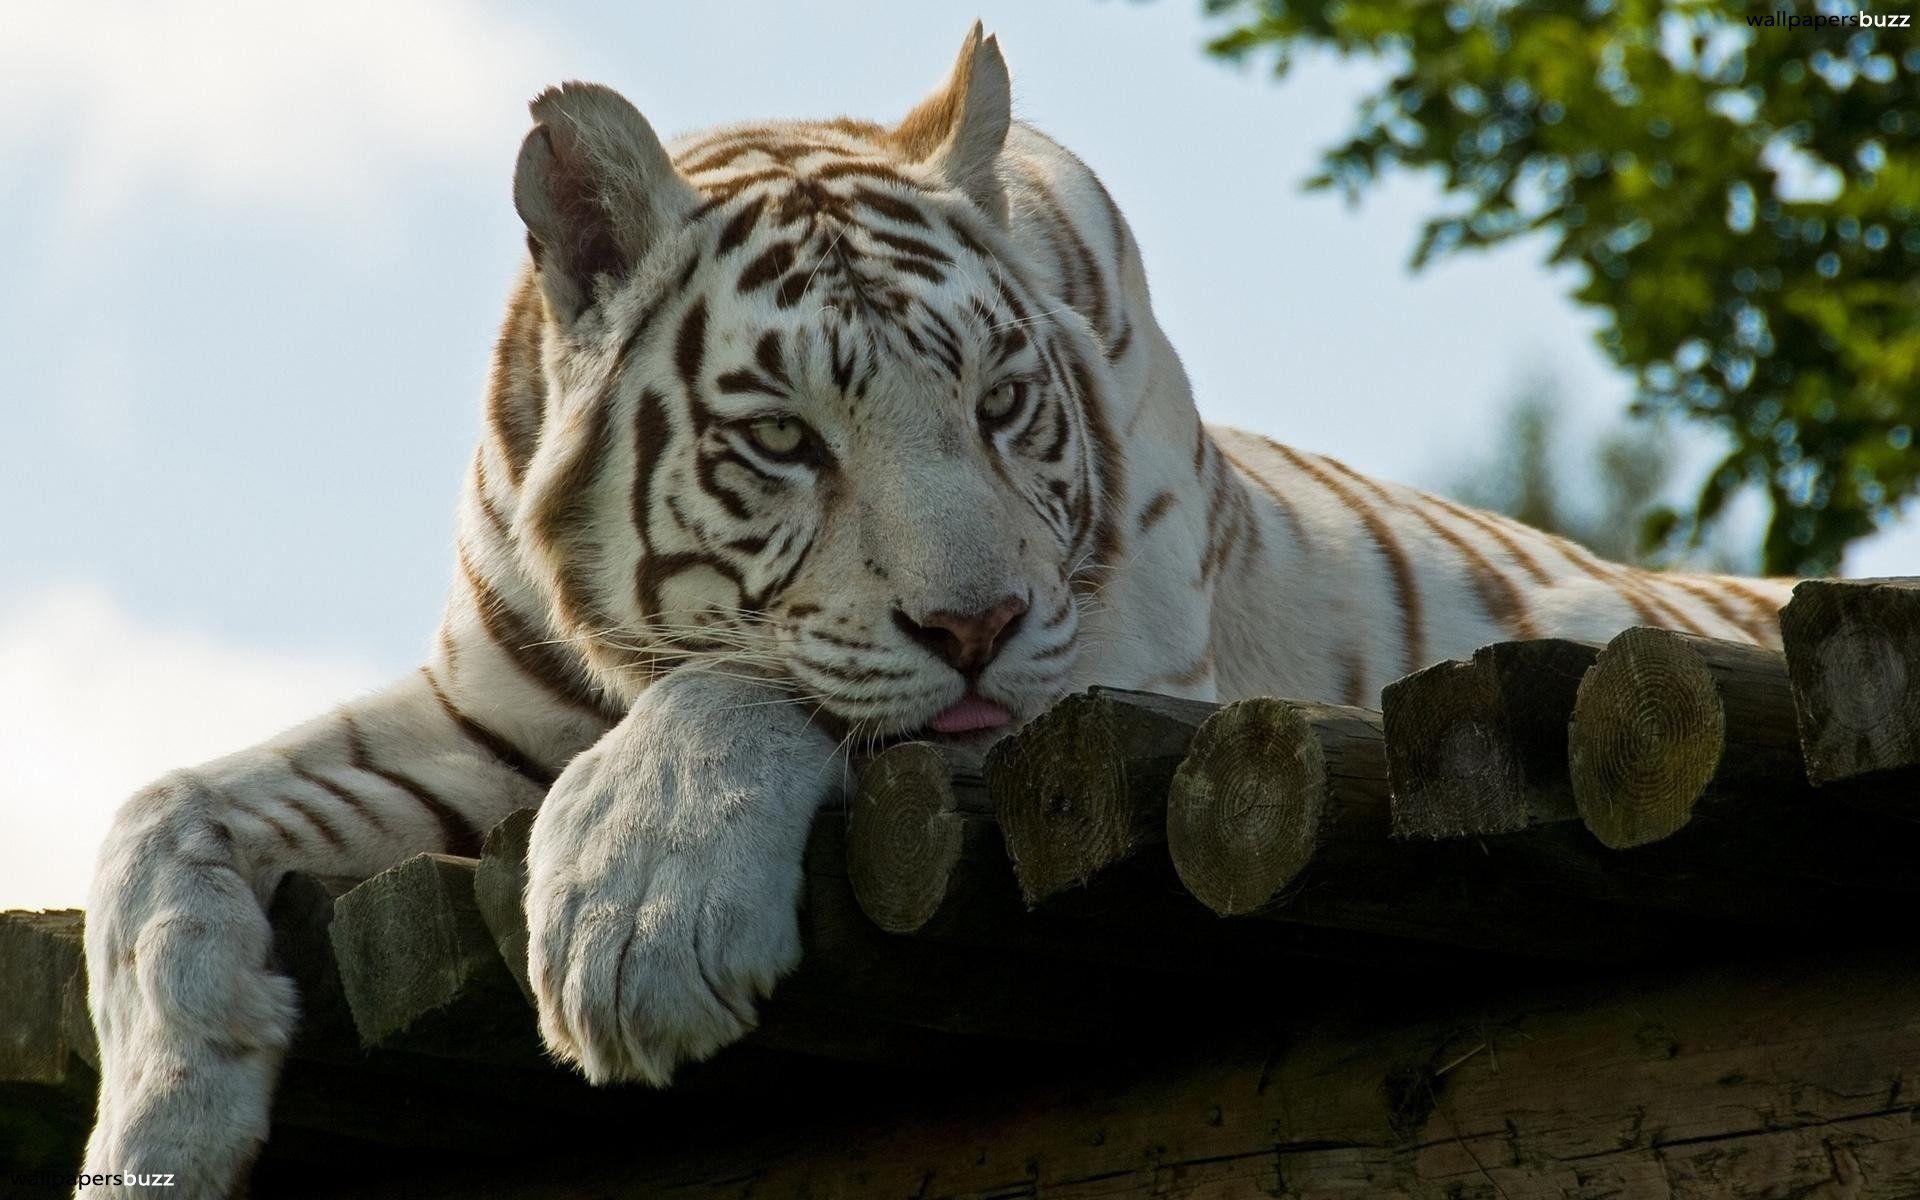 Wallpapers For > White Bengal Tiger Wallpapers